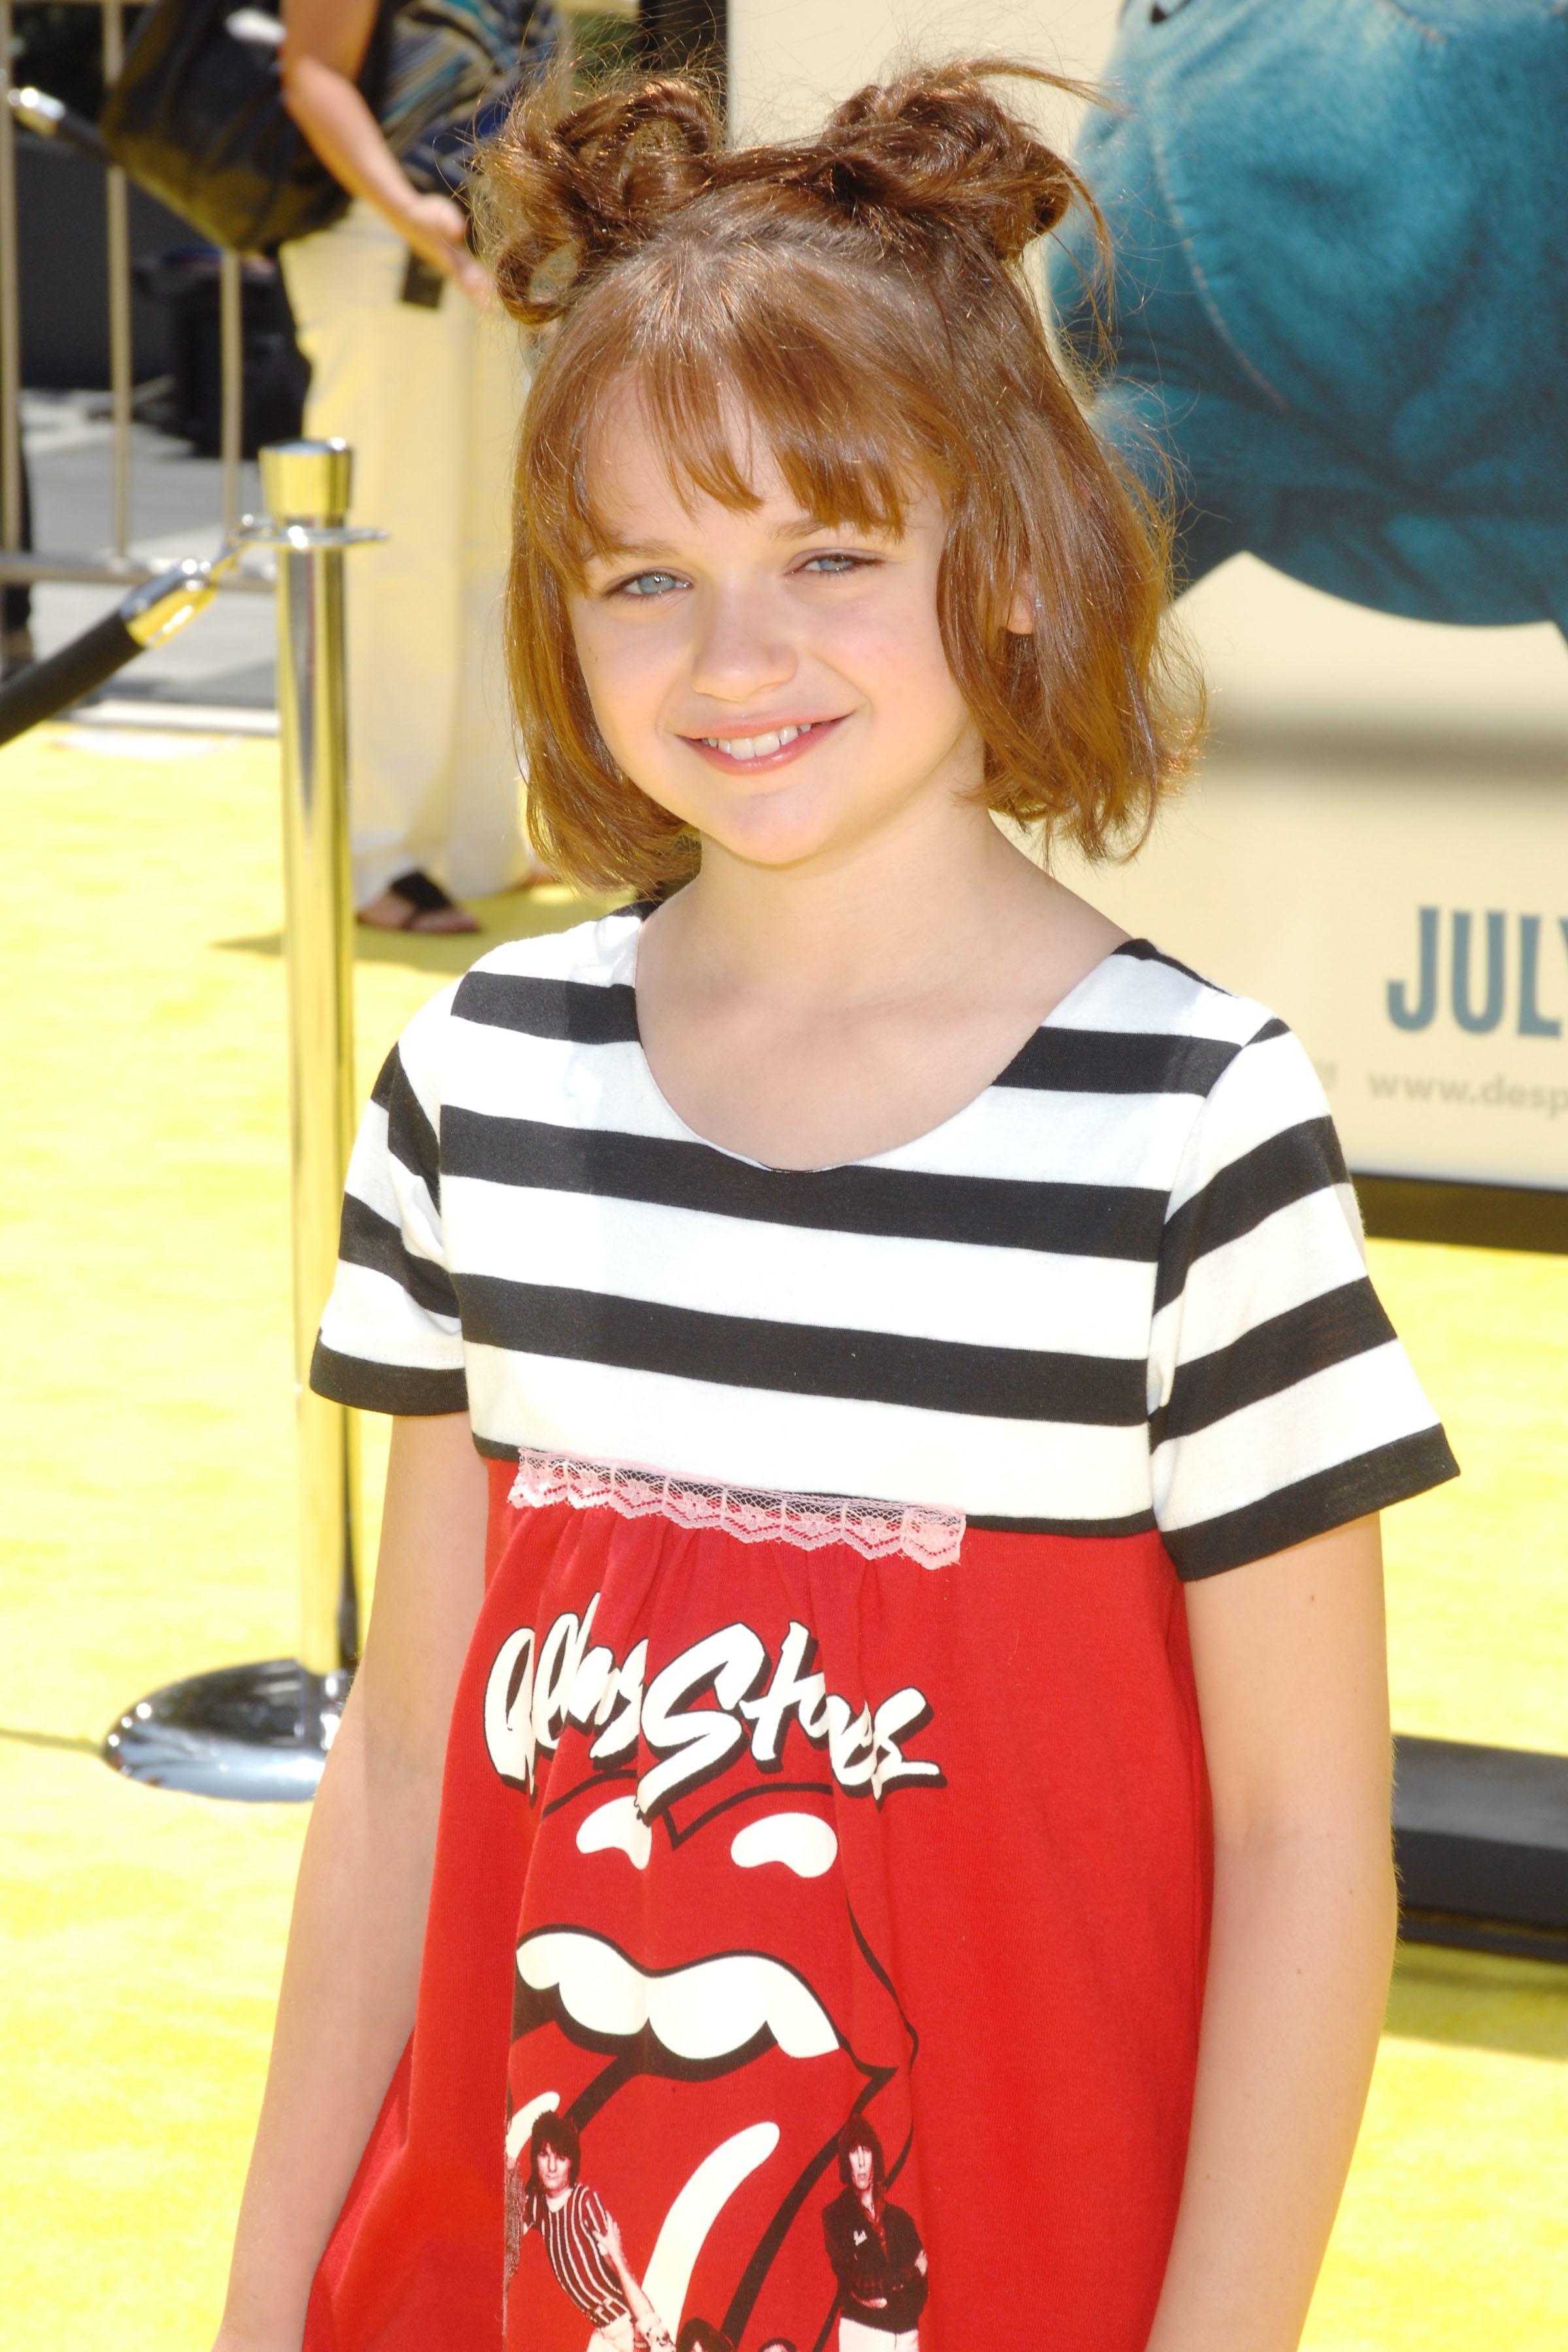 Young Joey King